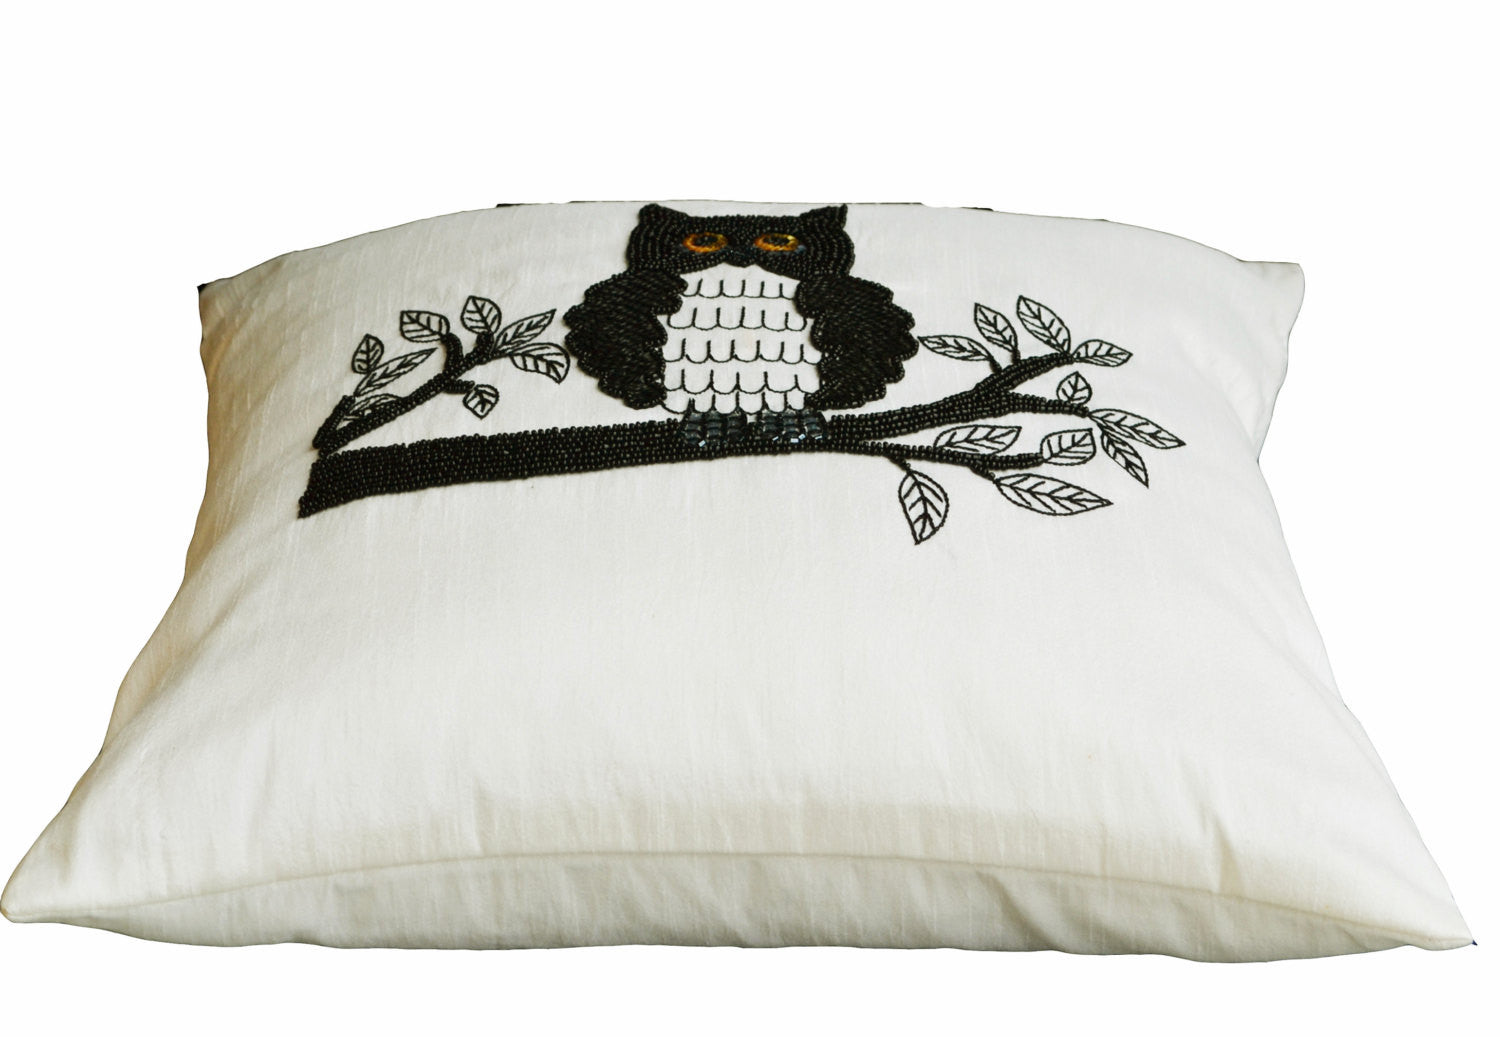 Handmade ivory silk pillow with owl embroidery